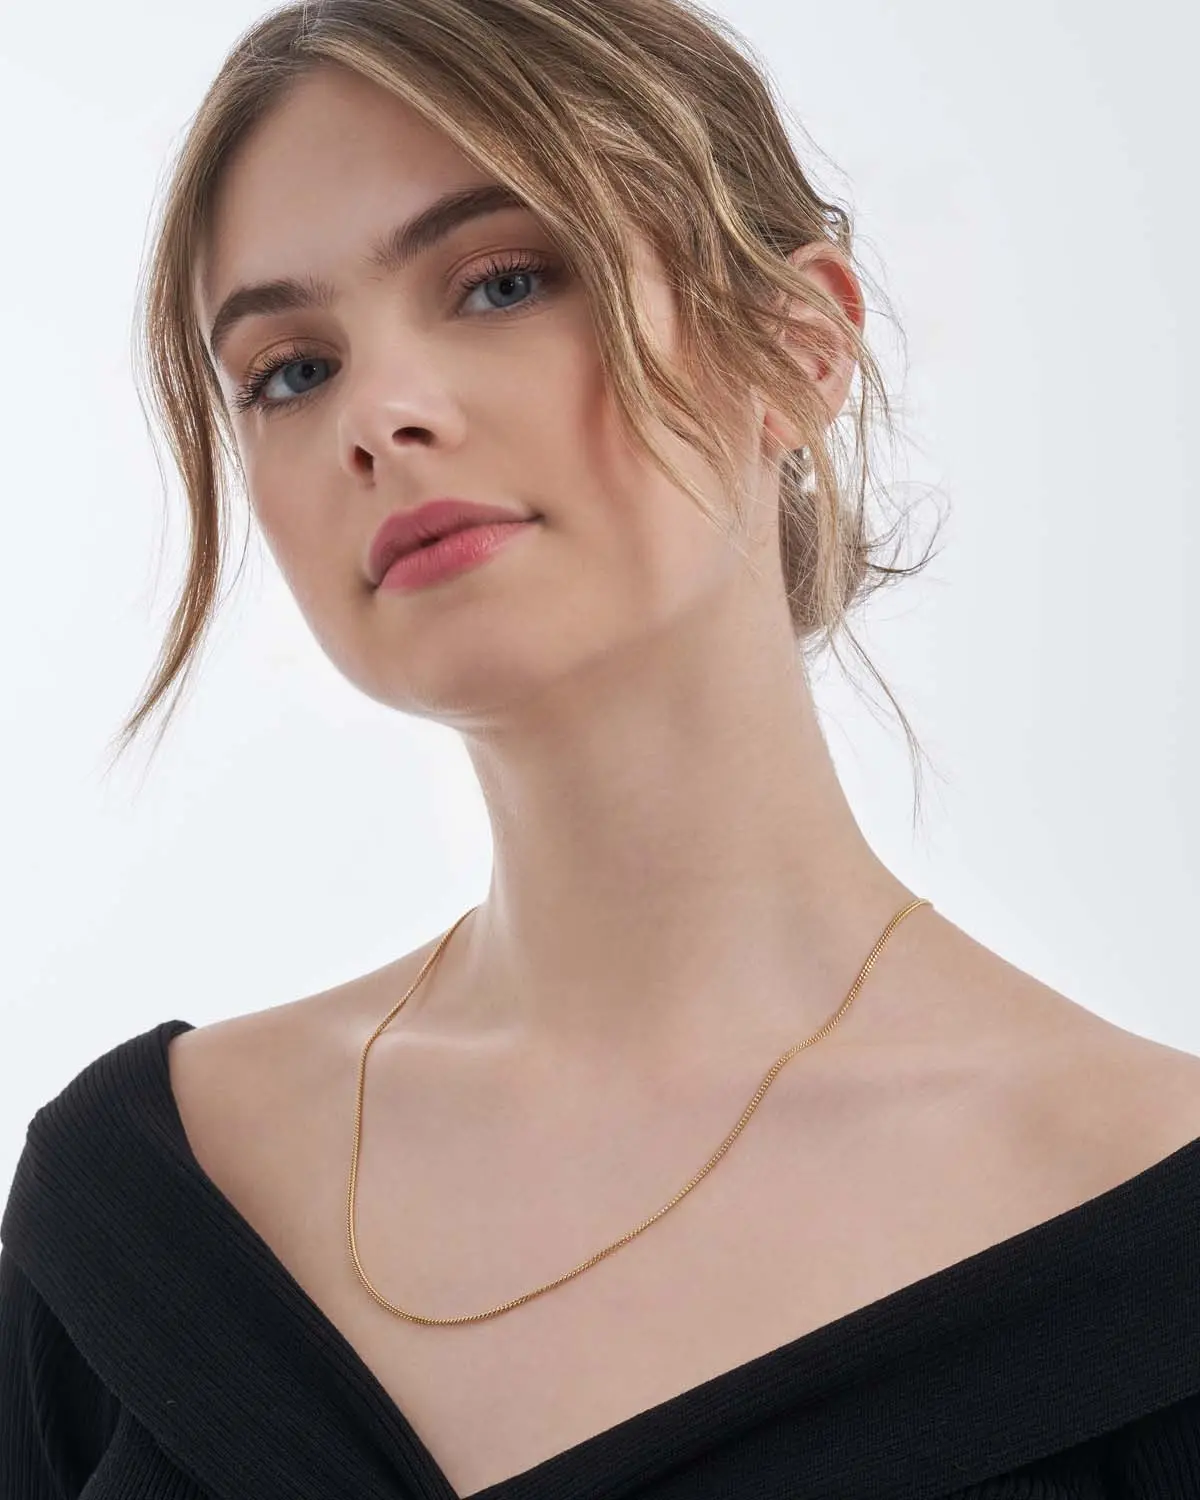 Ketting - Delicate Link